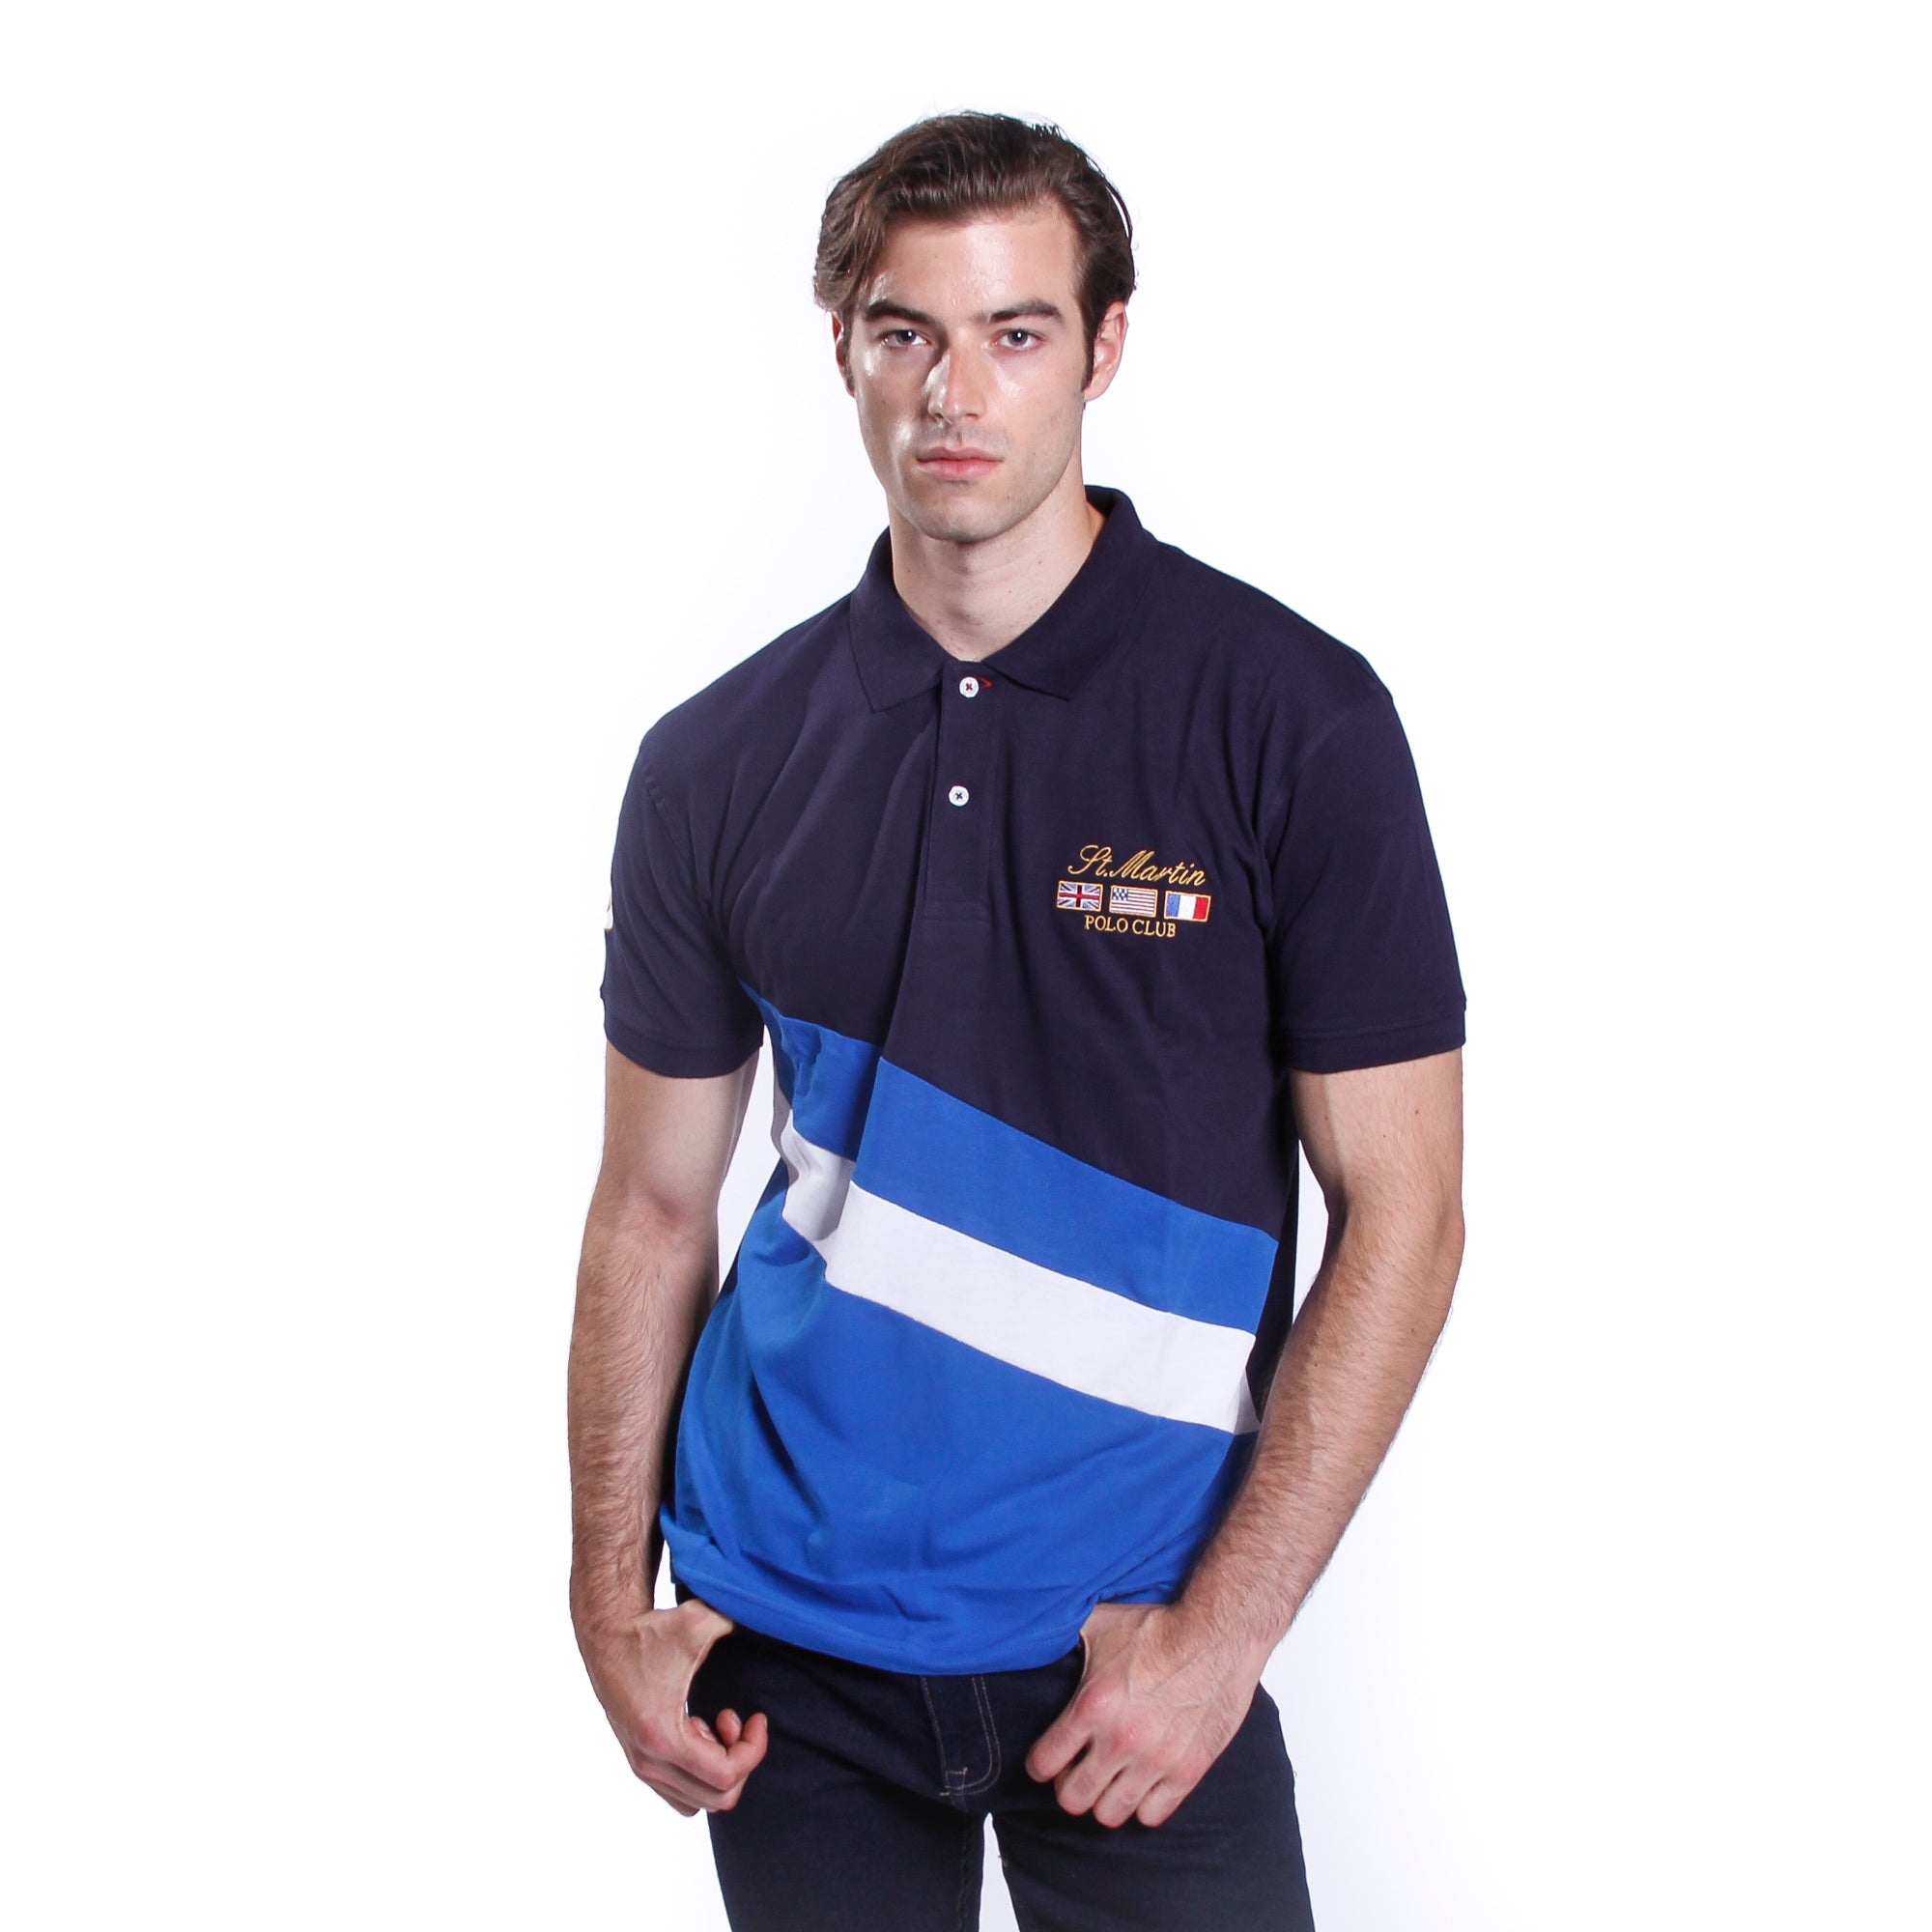 Piqué polo shirt with special cut and embroidery on the sleeve